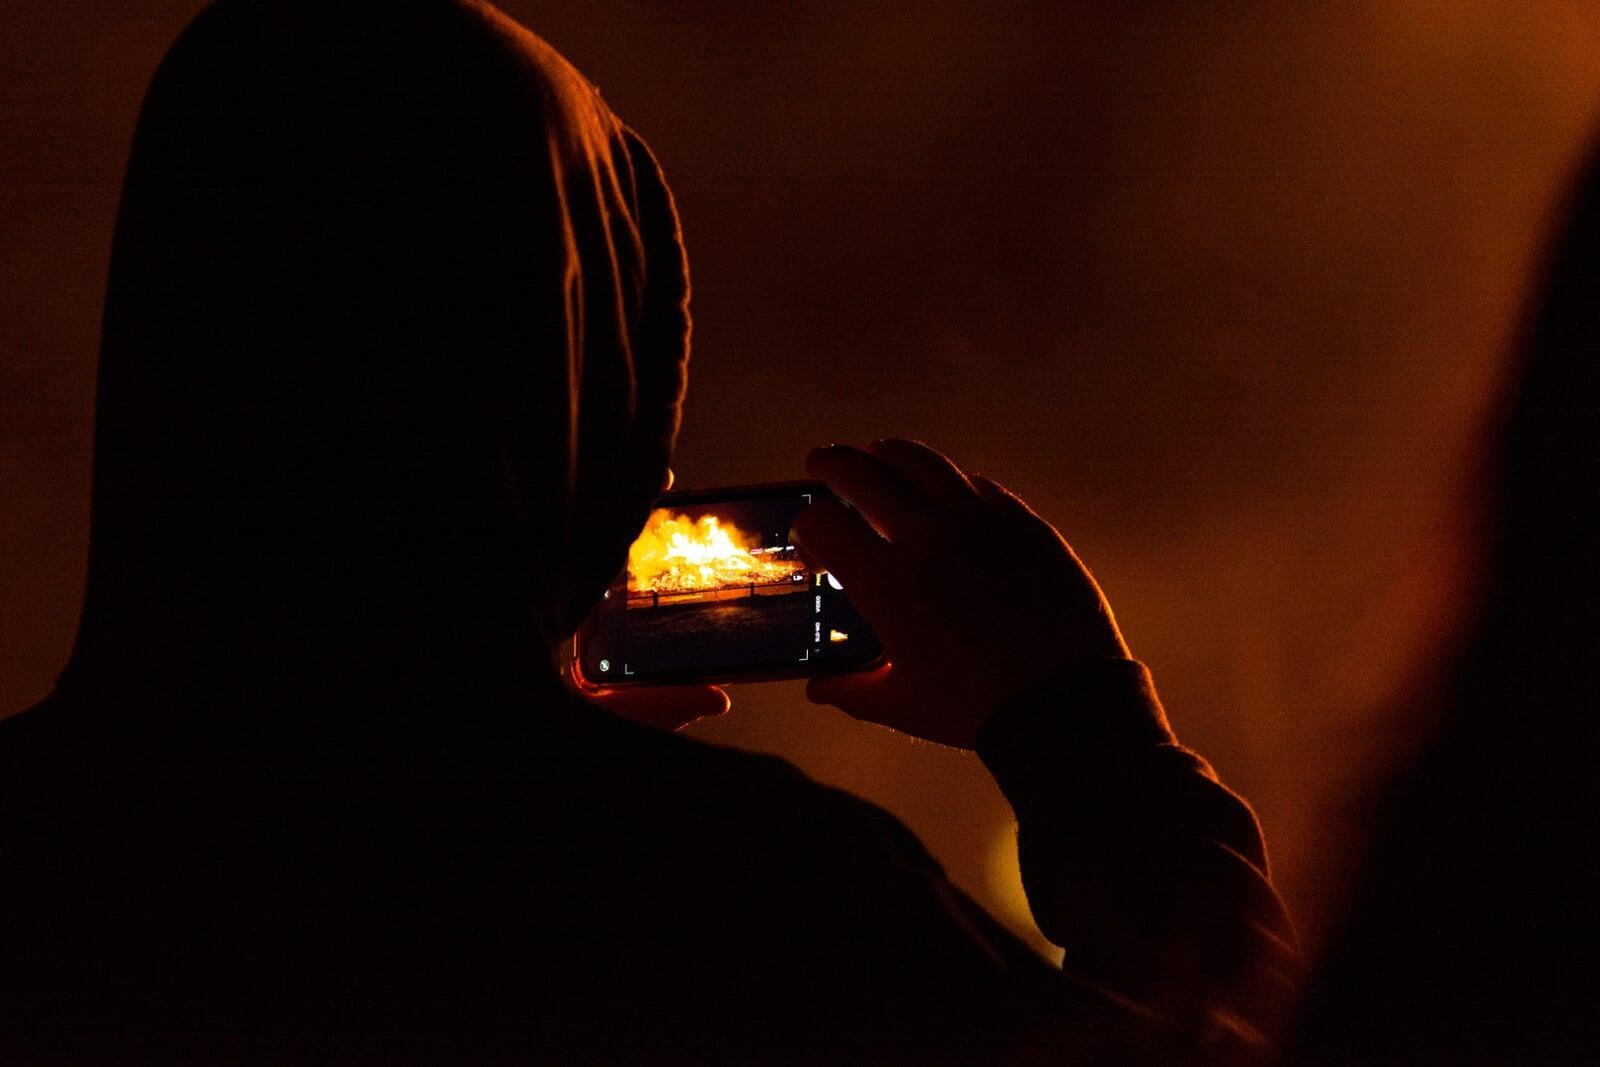 A decorative image showing a person in a hoodie looking at a phone that is displaying a large fire.